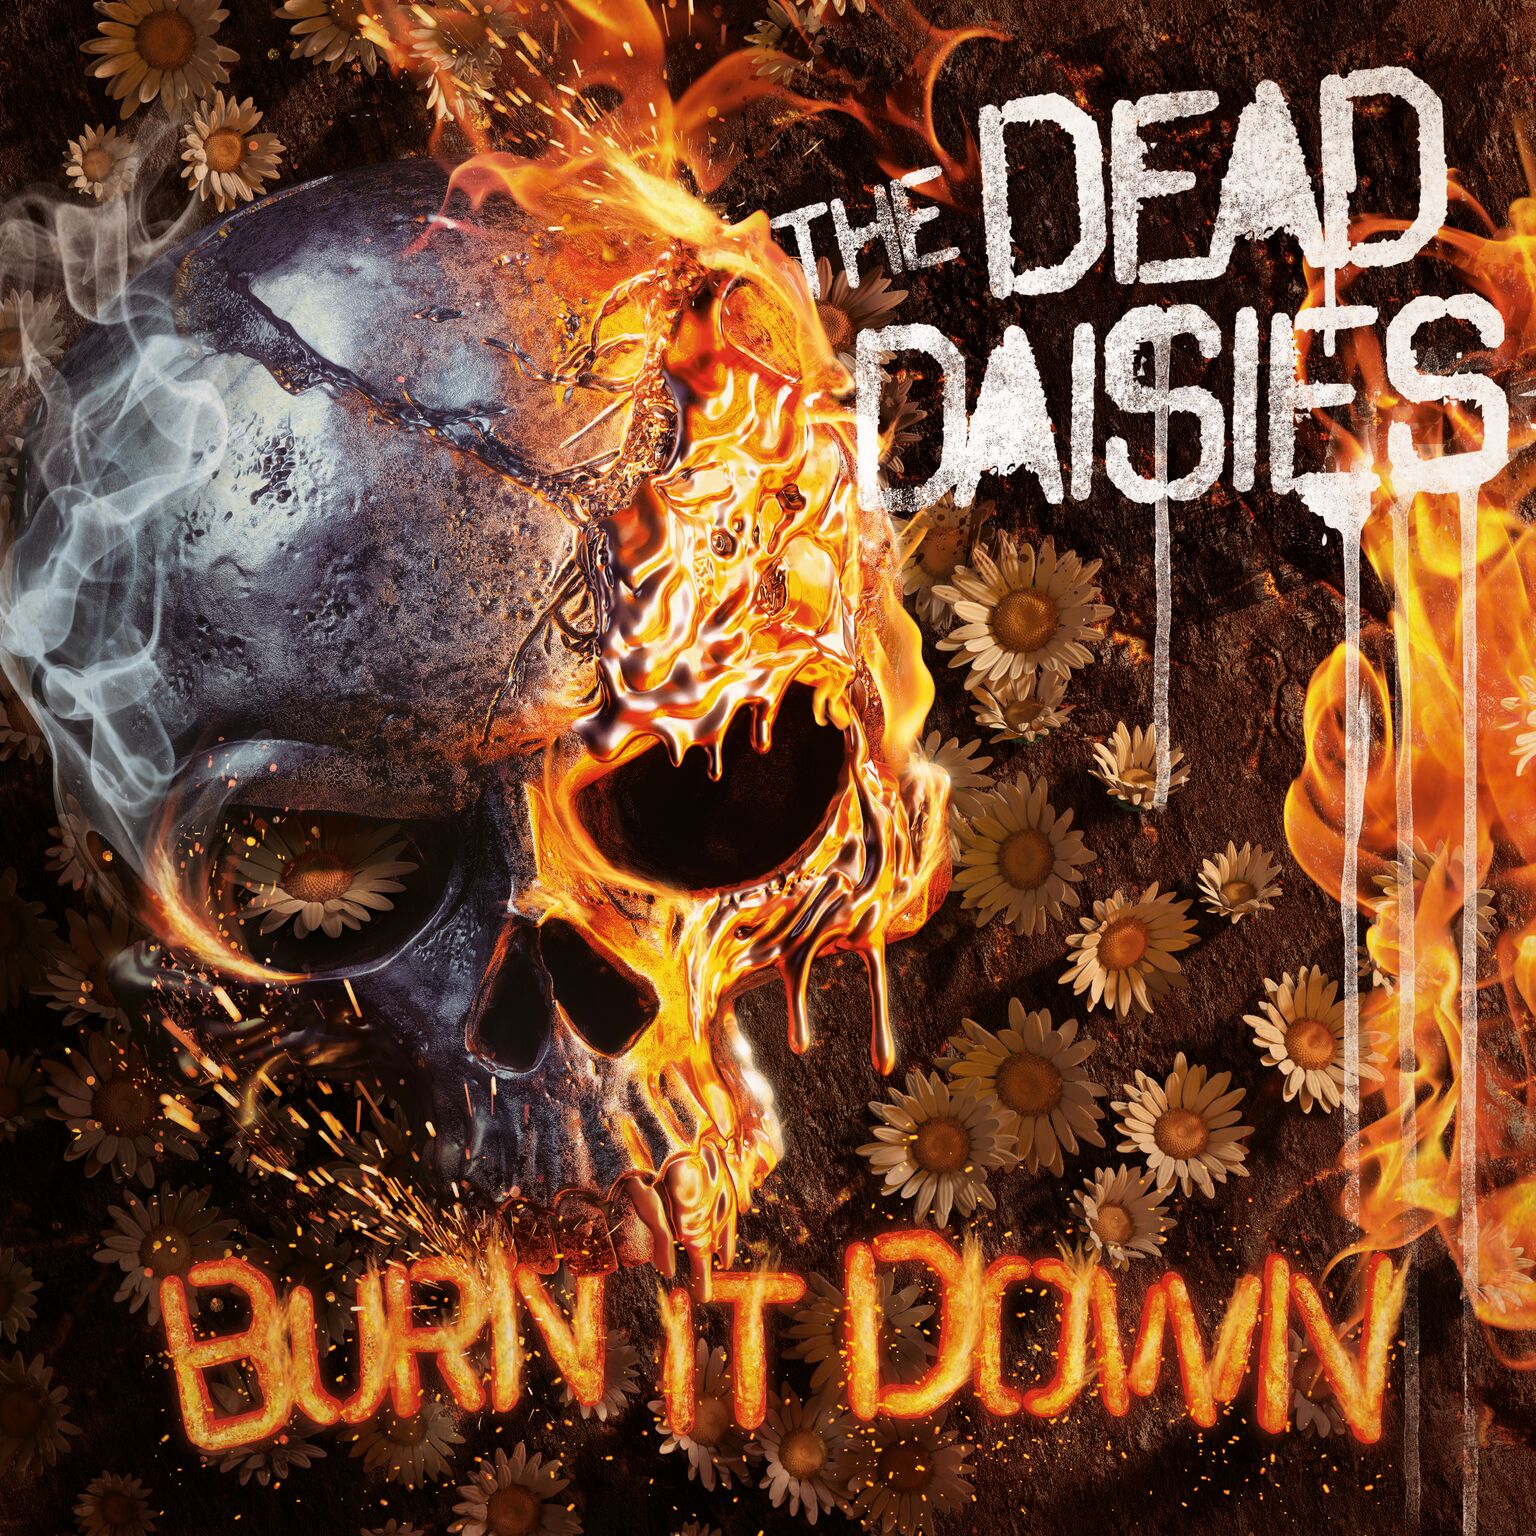 THE DEAD DAISIES announce new album releasing April 6th, 2018, World Tour Dates and Band Member Addition!